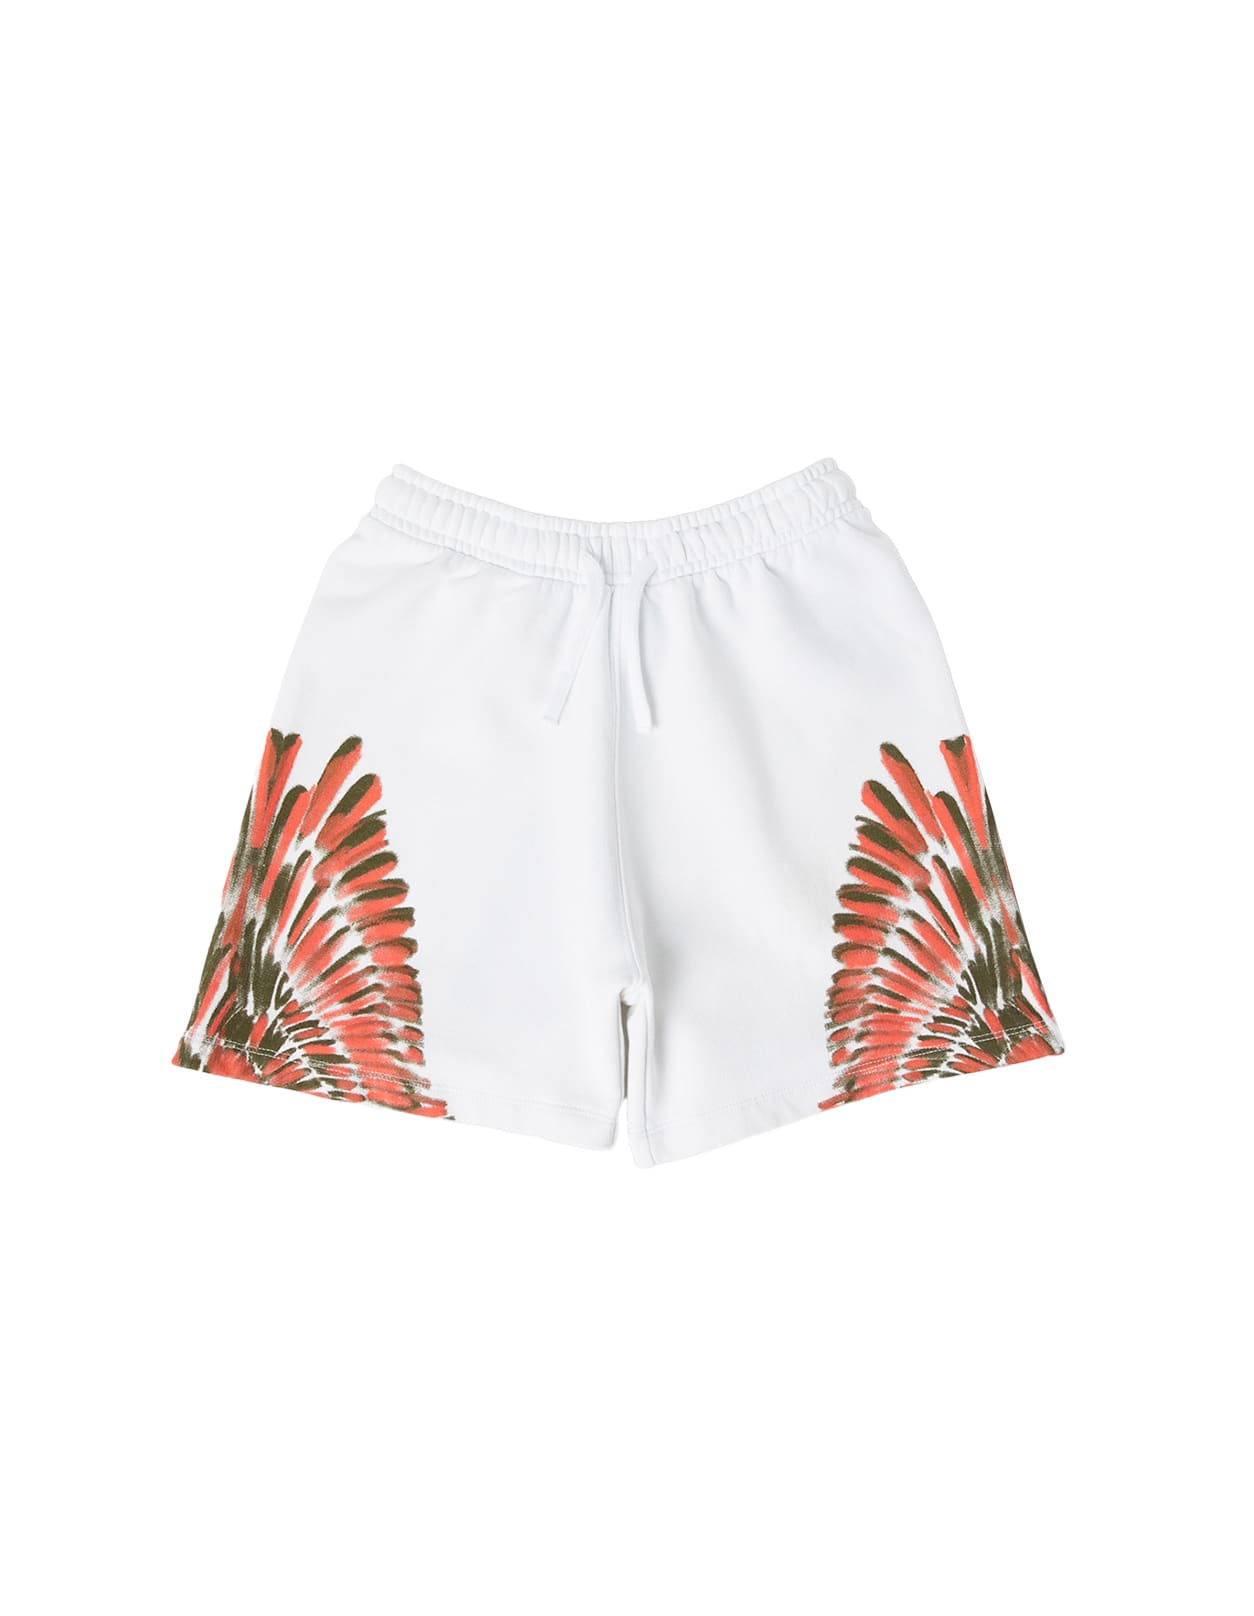 MARCELO BURLON COUNTY OF MILAN WHITE SHORTS WITH RED PRINTED WINGS